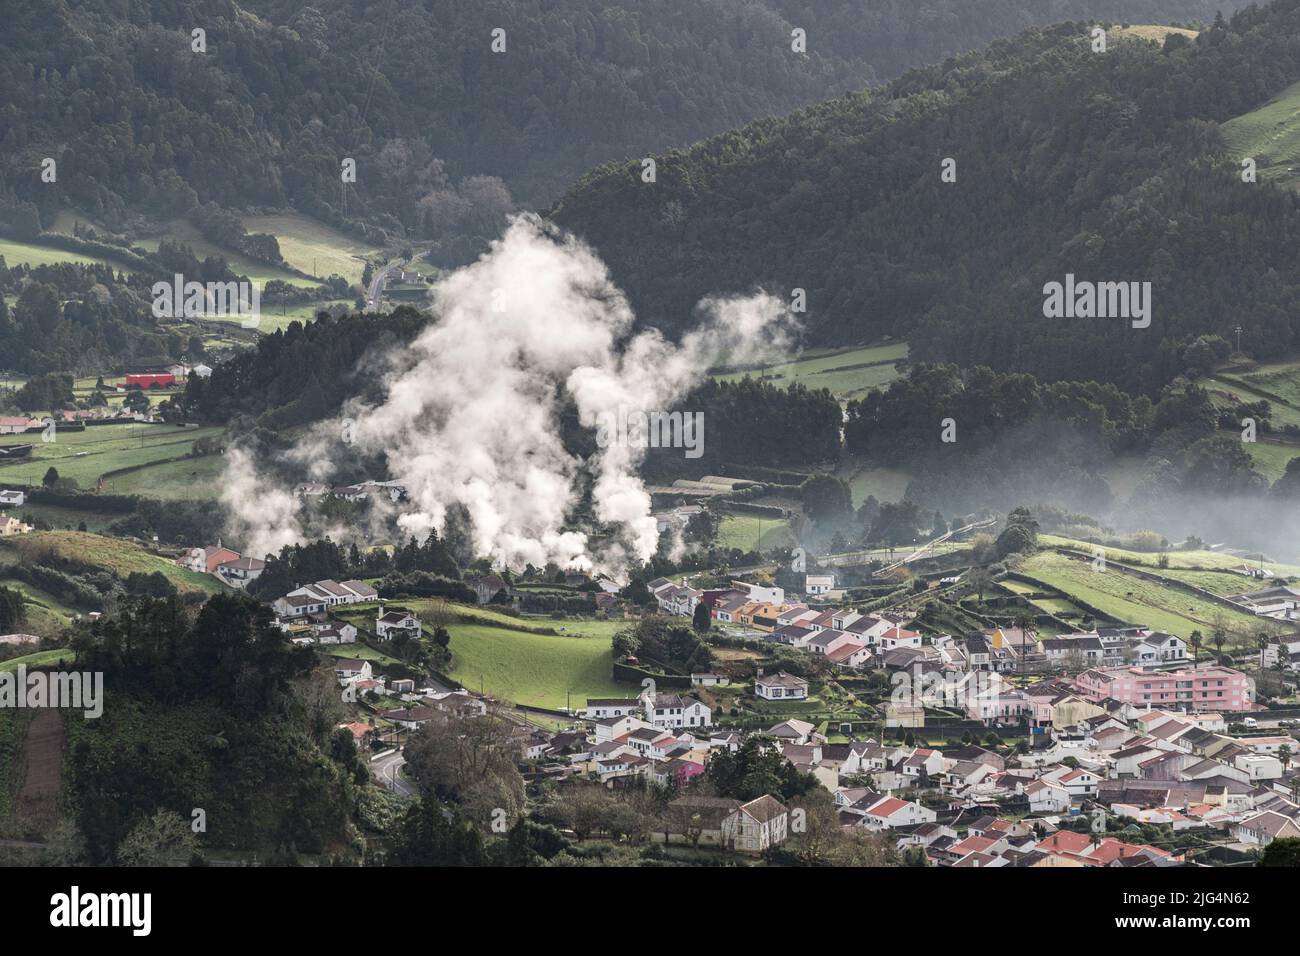 Panoramic view of the small village Furnas with its fumaroles in the Sao Miguel island. Azores, Portugal. Stock Photo